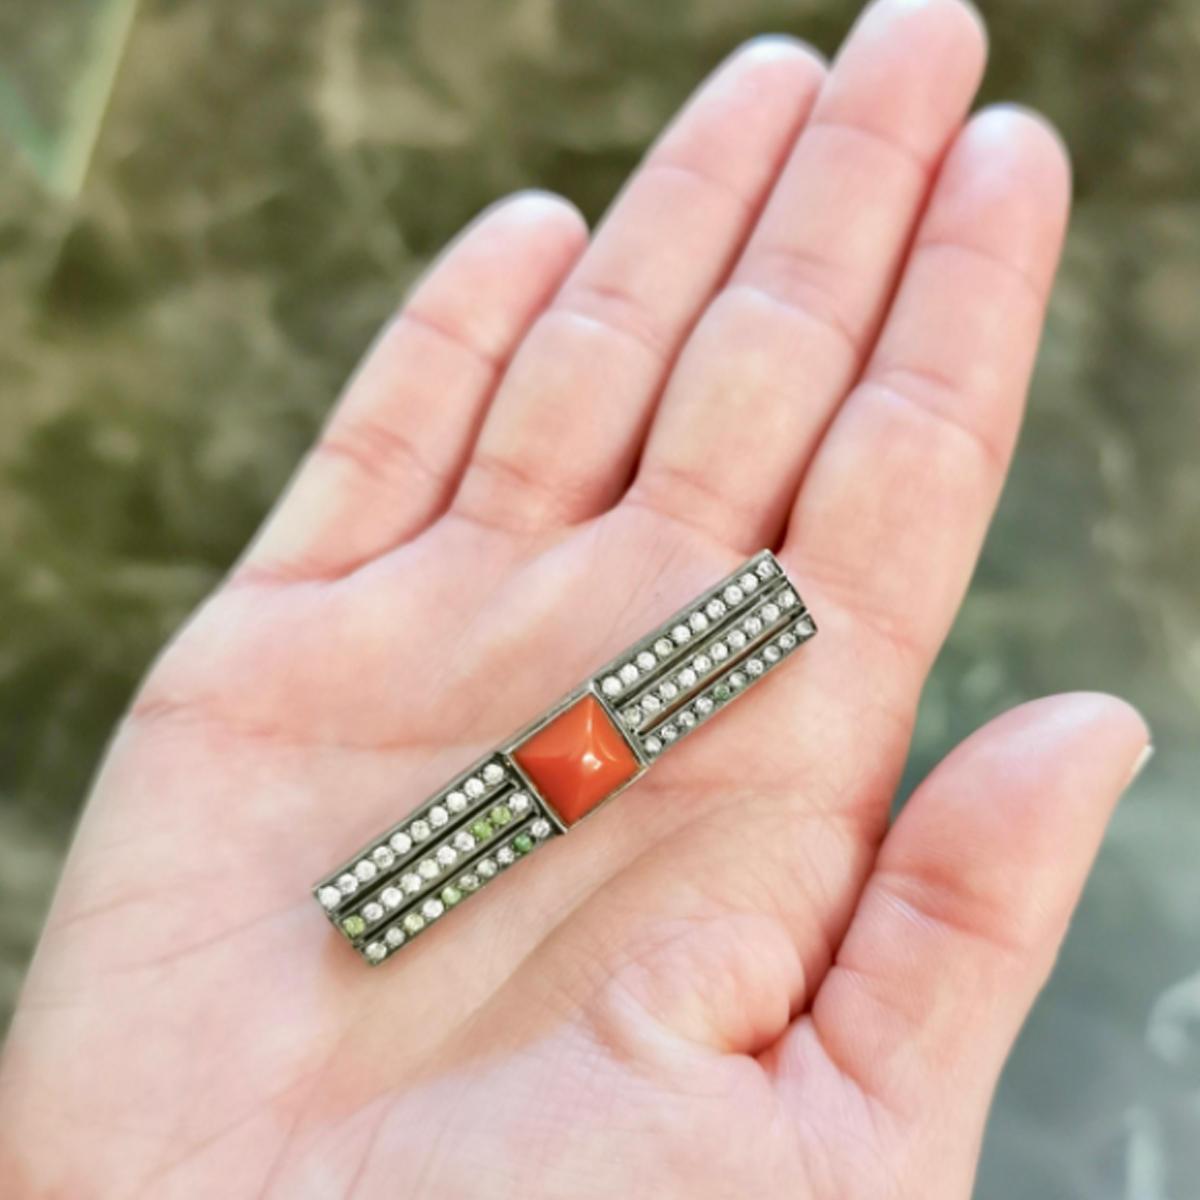 French Art Deco Brooch Paste Coral on Silver. Circa 1930.
French assay mark.

Length: 1.97 inch (5.00 centimeters).
Width: 0.39 inch (1.00 centimeters).
Total weight: 8.29 grams